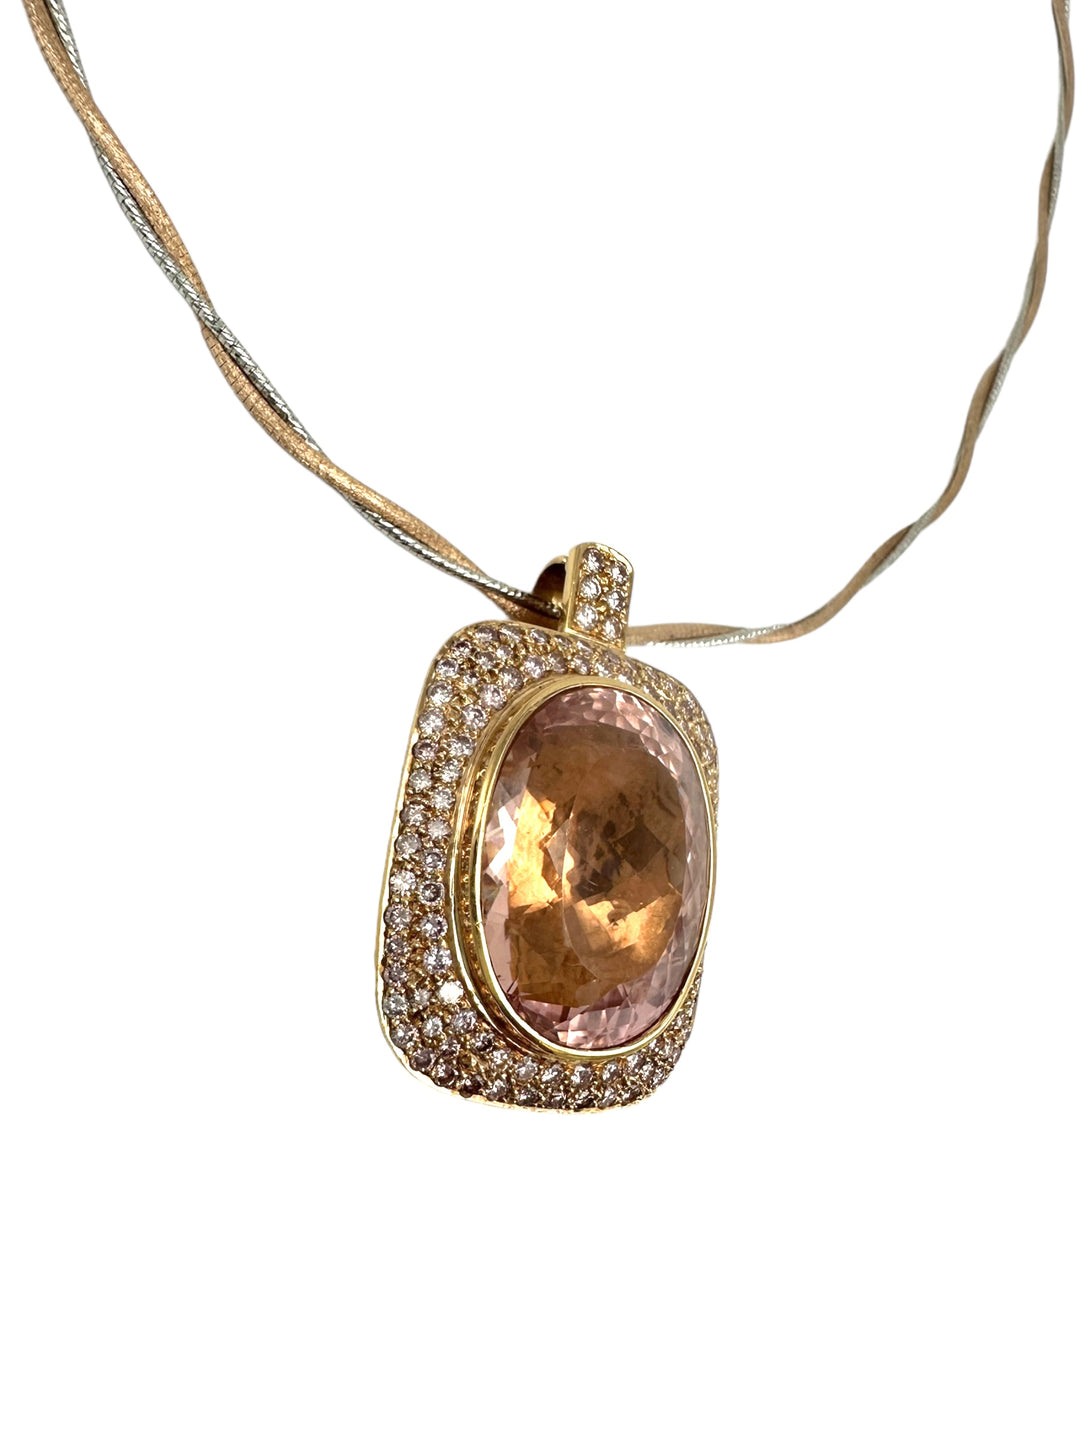 18Kt Rose gold 44.37ct Morganite and 4 ct Diamond Halo Necklace